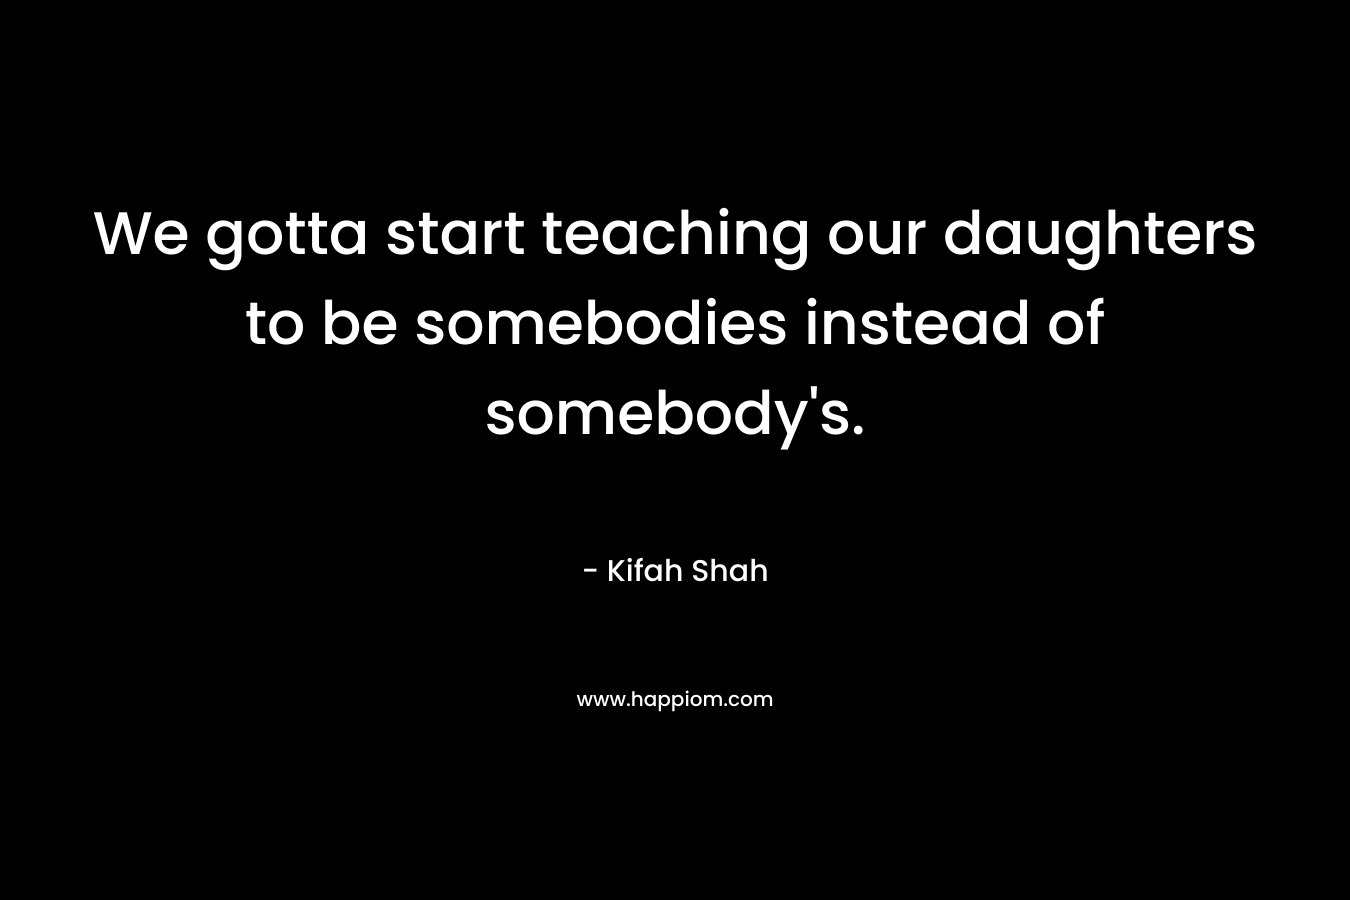 We gotta start teaching our daughters to be somebodies instead of somebody's.